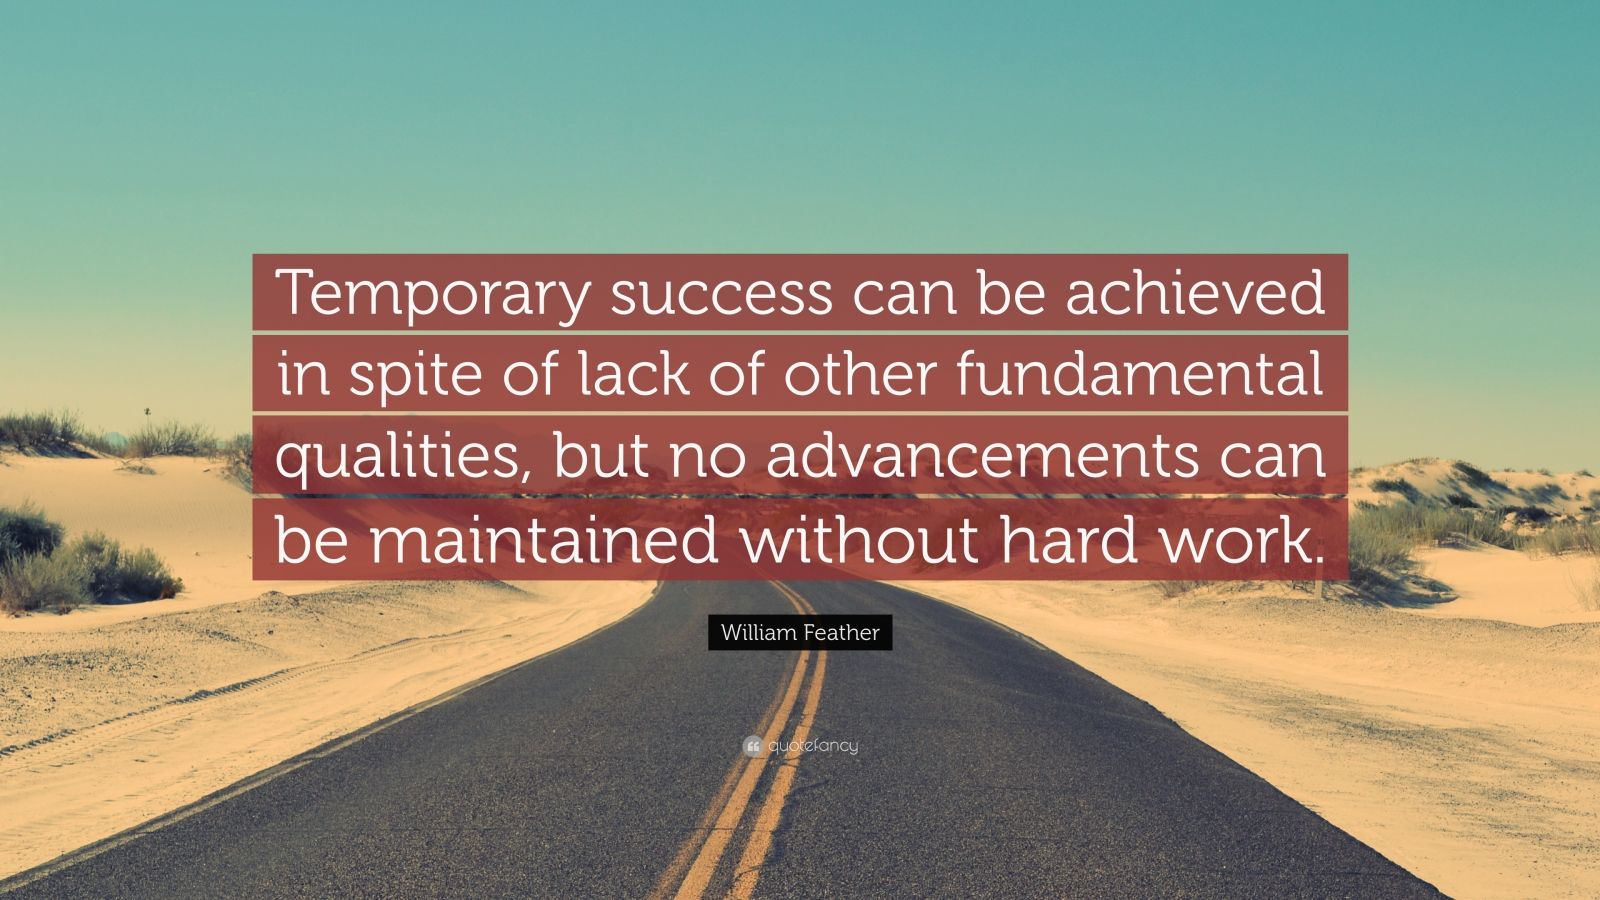 William Feather Quote: “Temporary success can be achieved in spite of ...